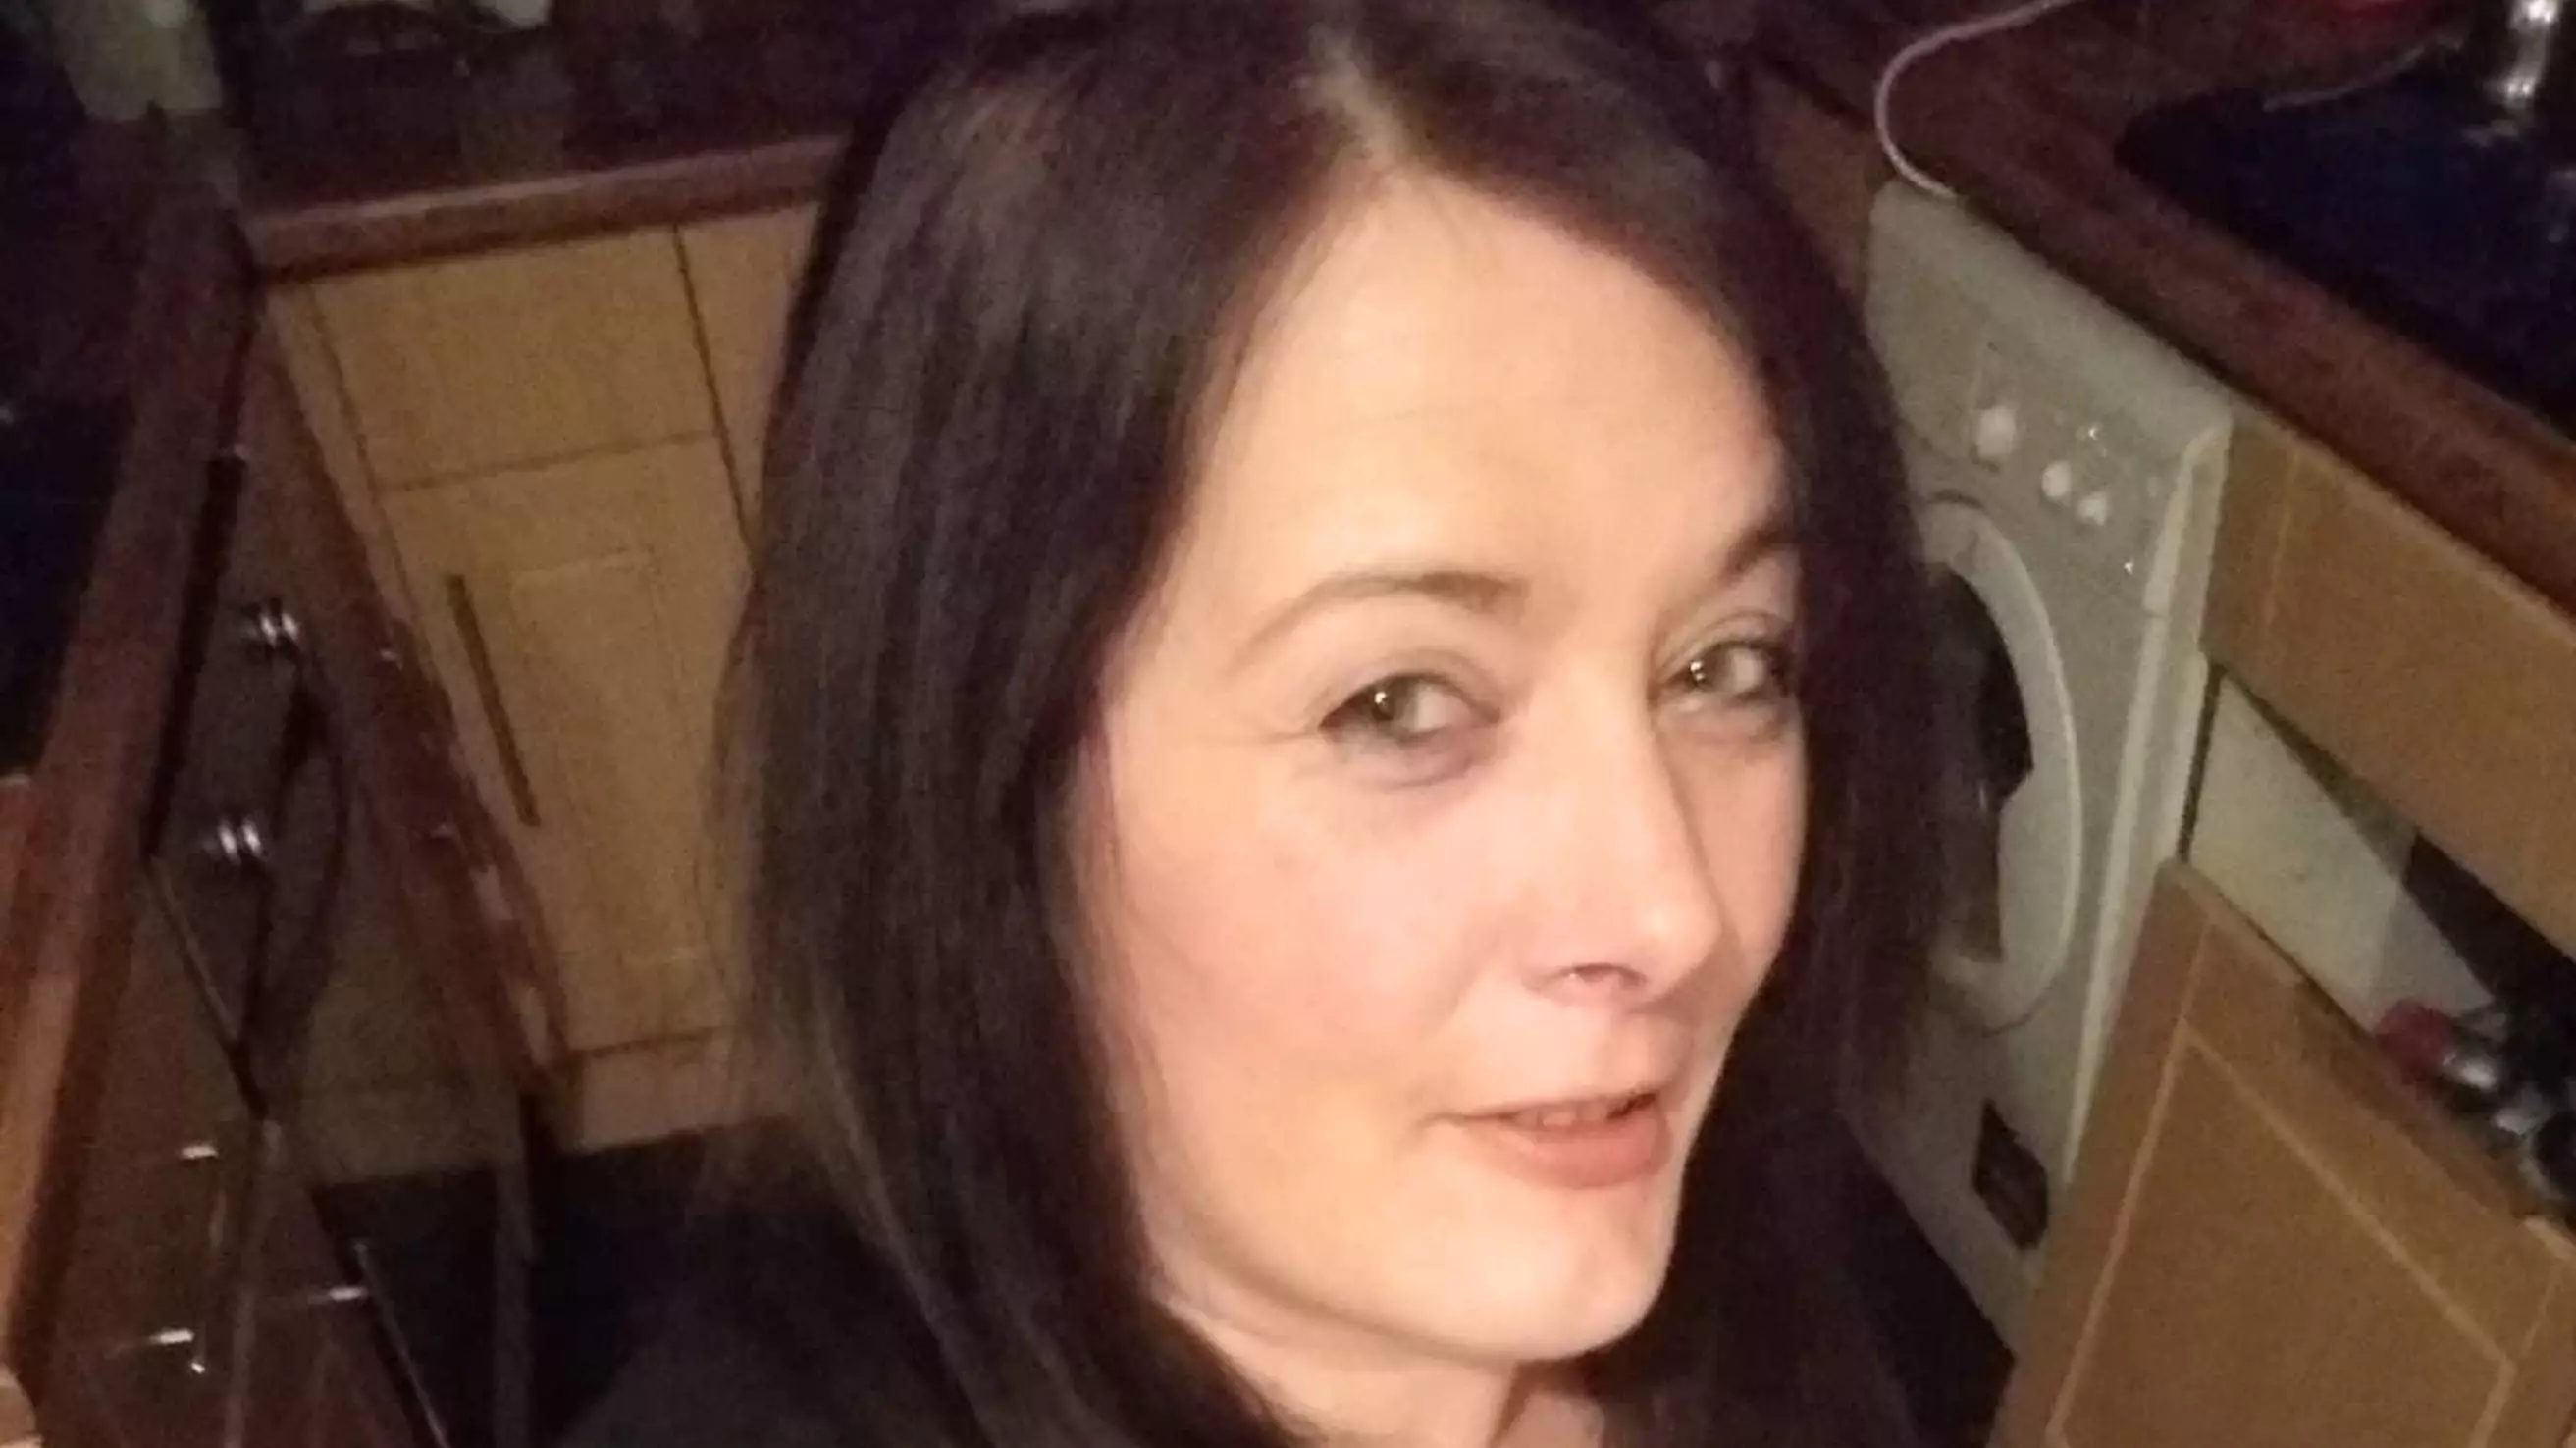 Horrified Mum Called 'C***' Three Times In Exchange With New Look But Retailer Denies Wrongdoing